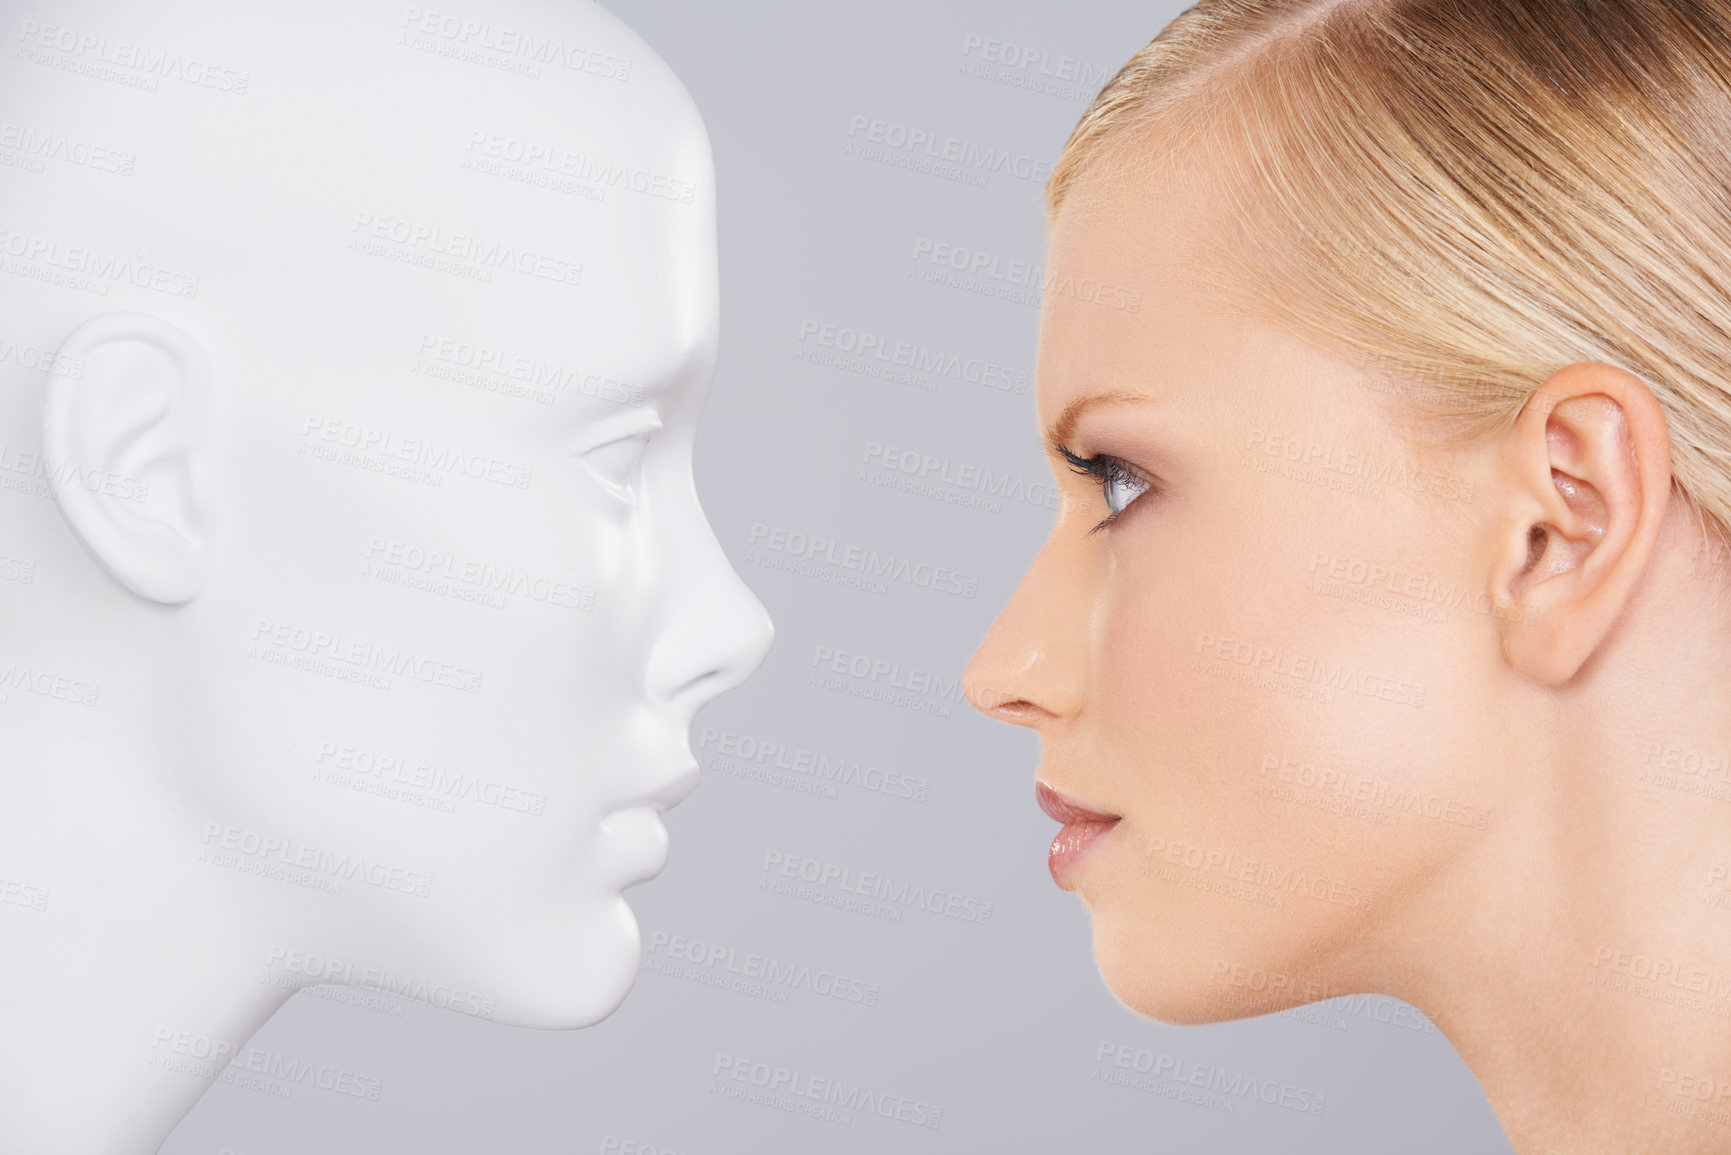 Buy stock photo Close up of a woman looking at a dummy